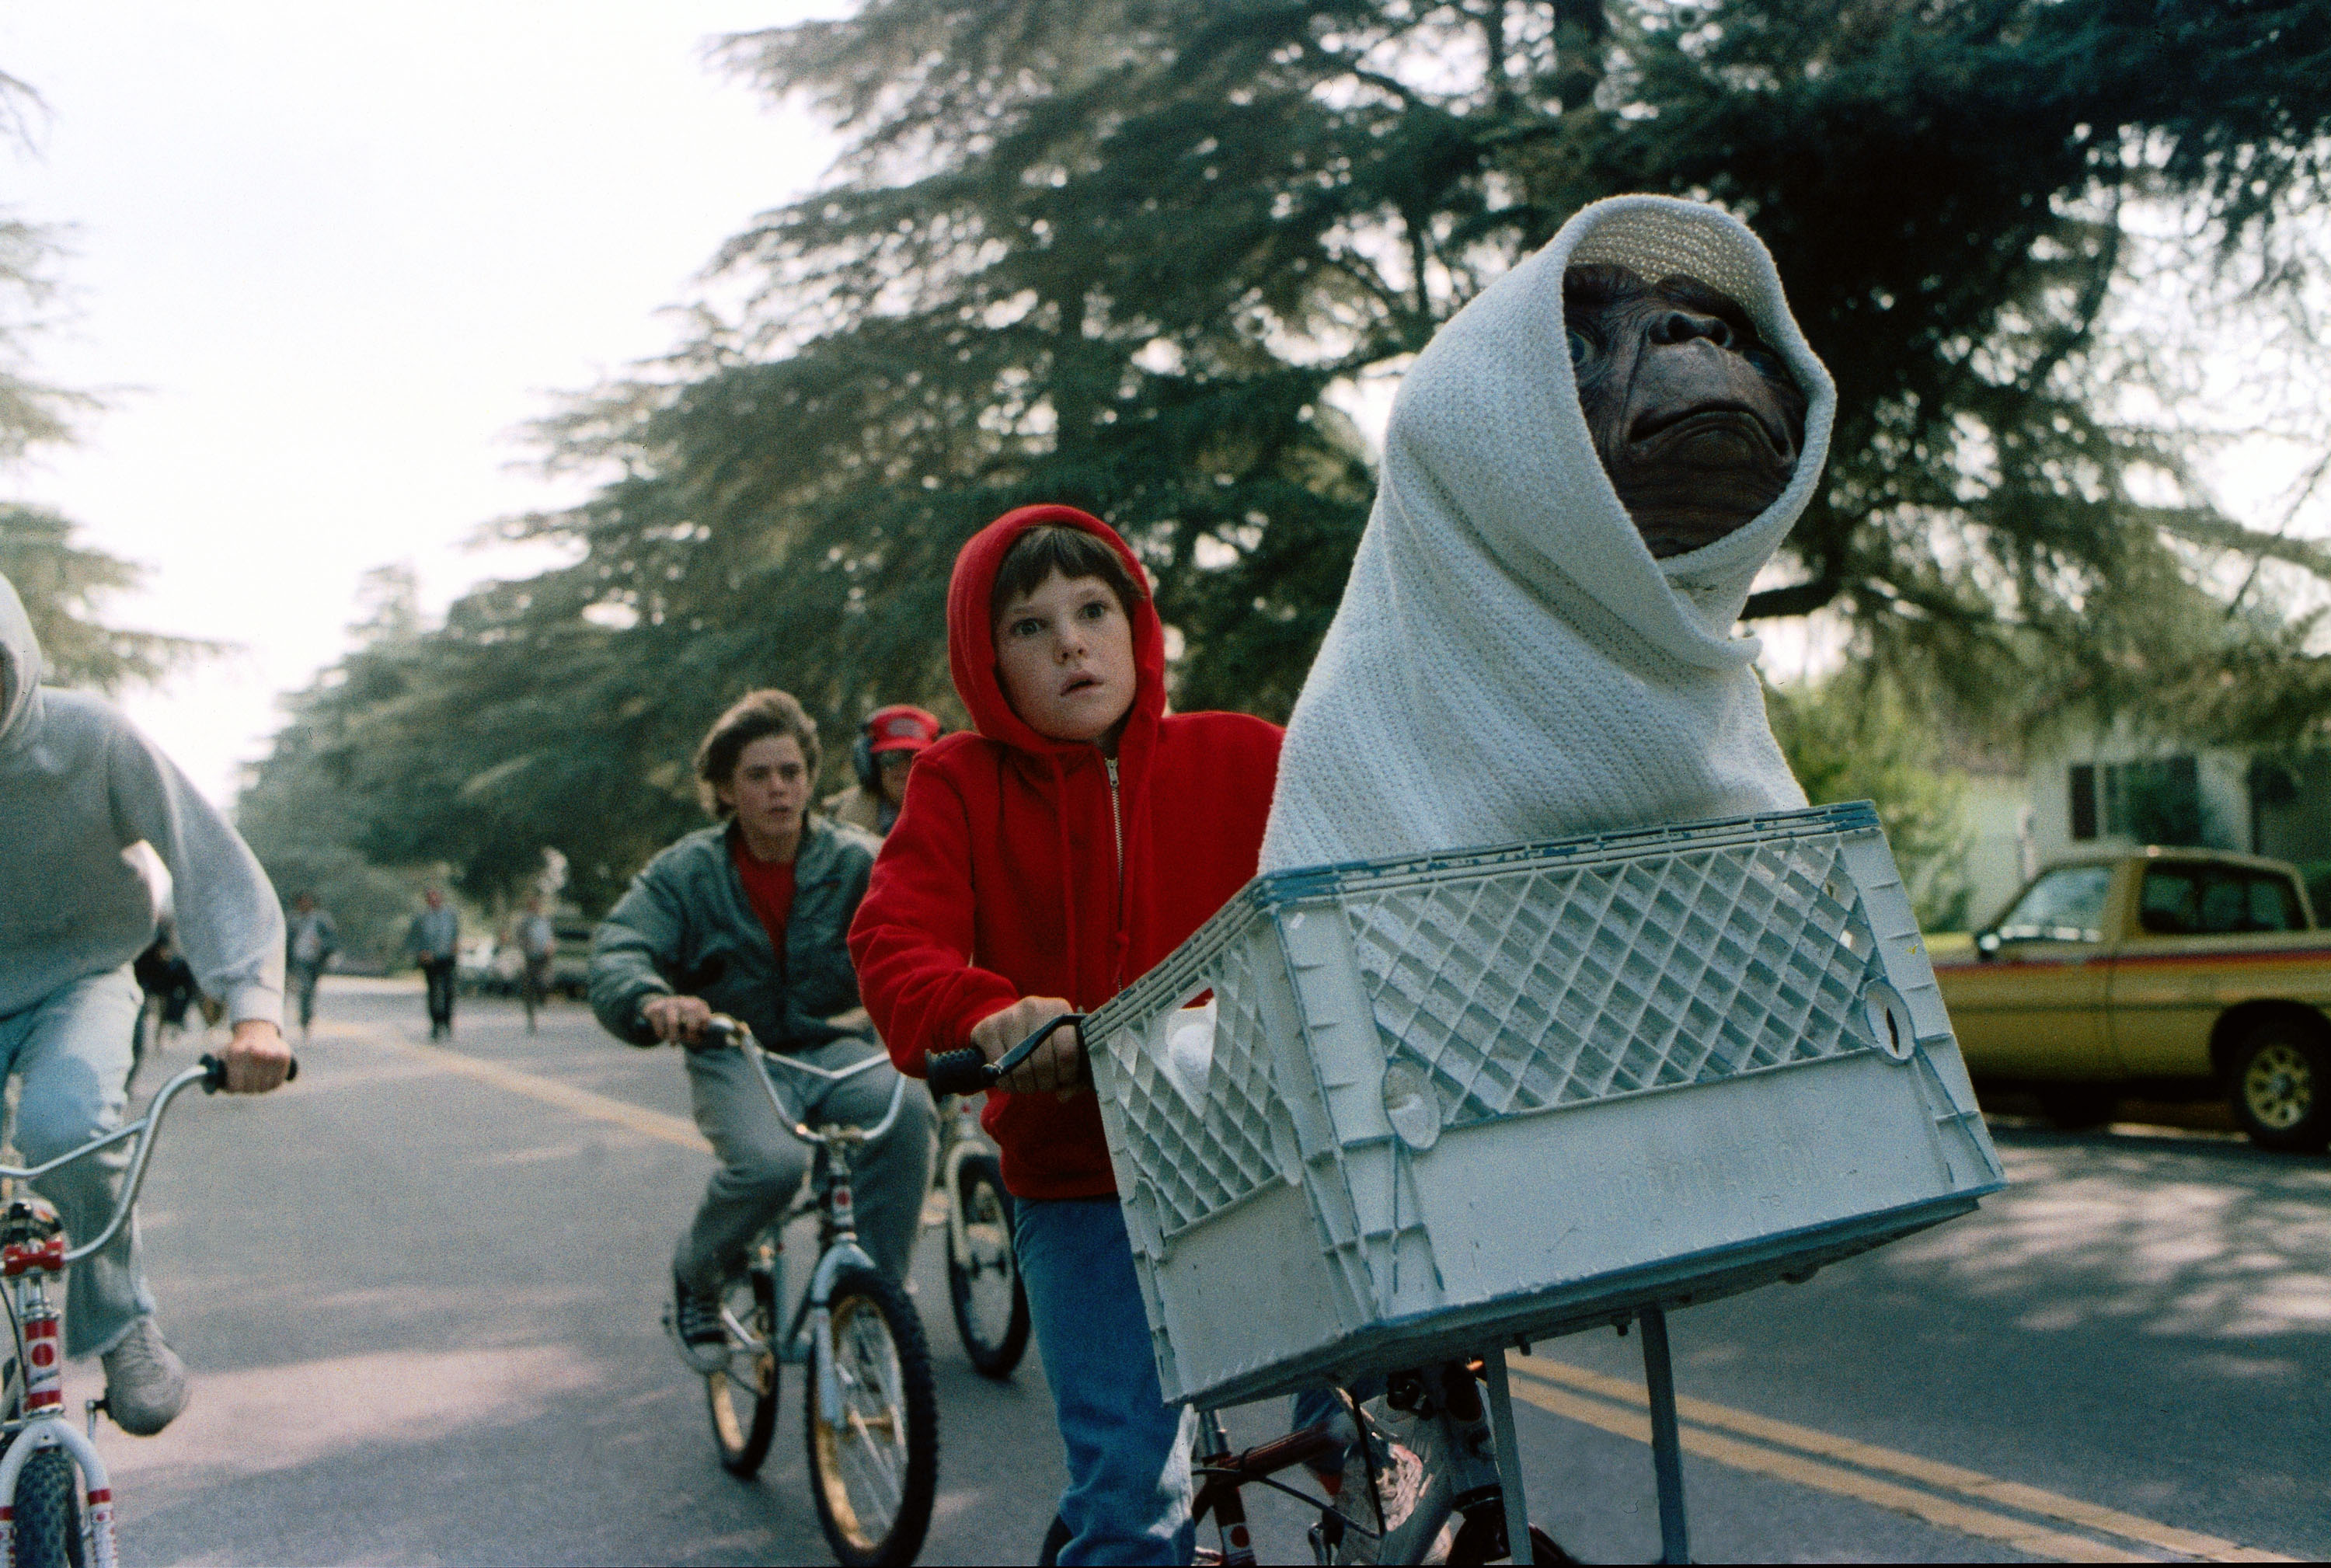 An original model of E.T. is sold at auction for $2.56 million